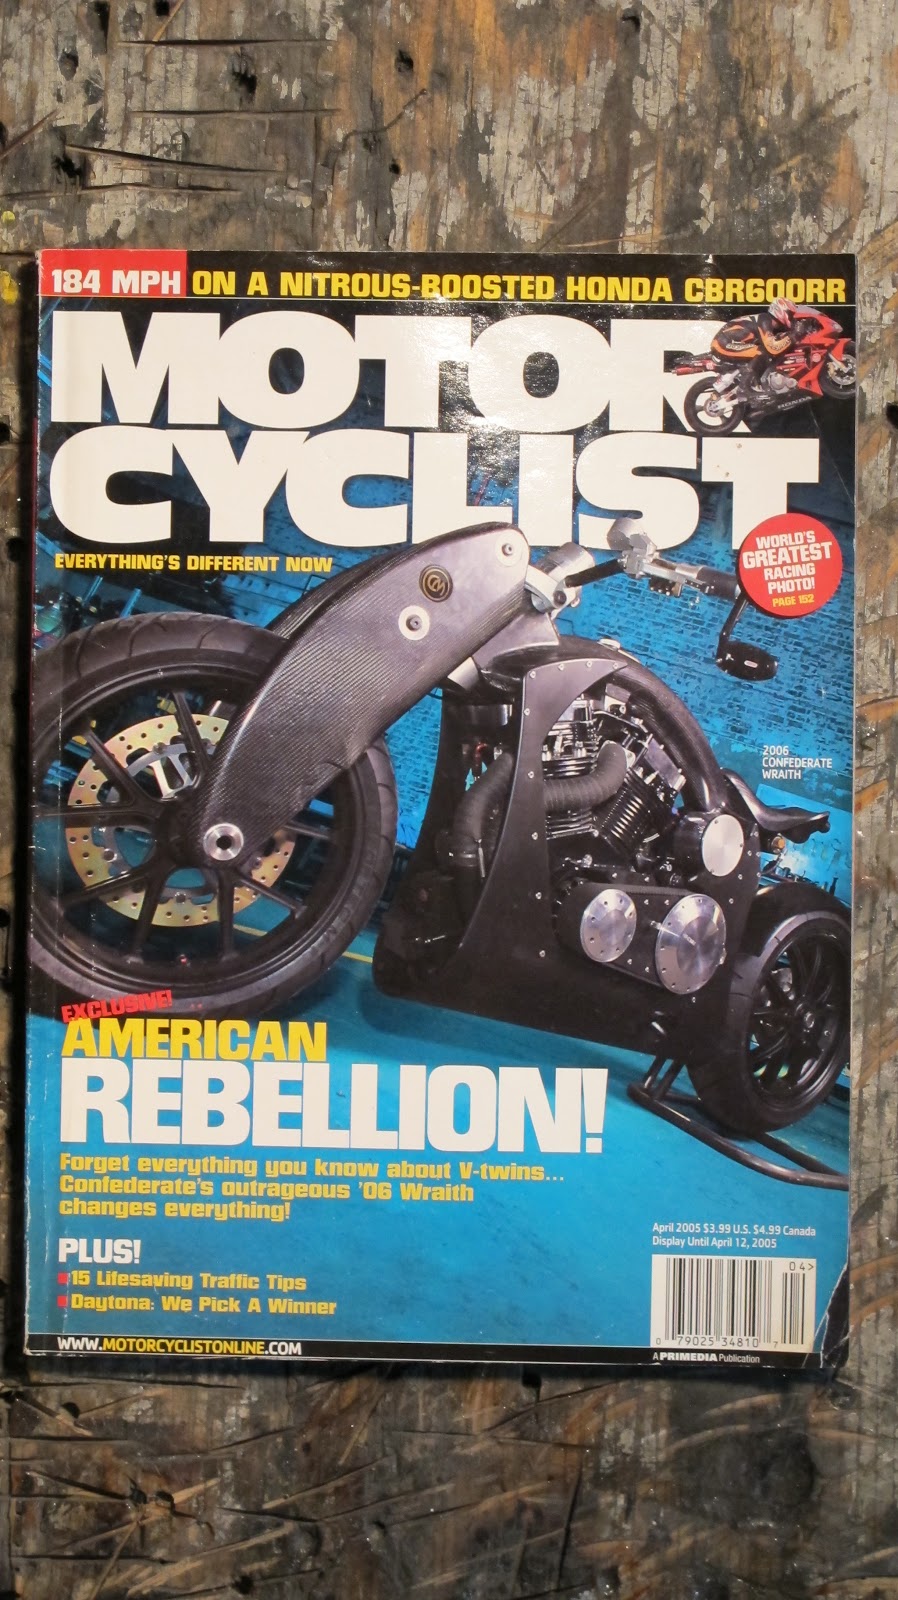 Confederate Wraith Black Bike in Motorcyclist April 2005